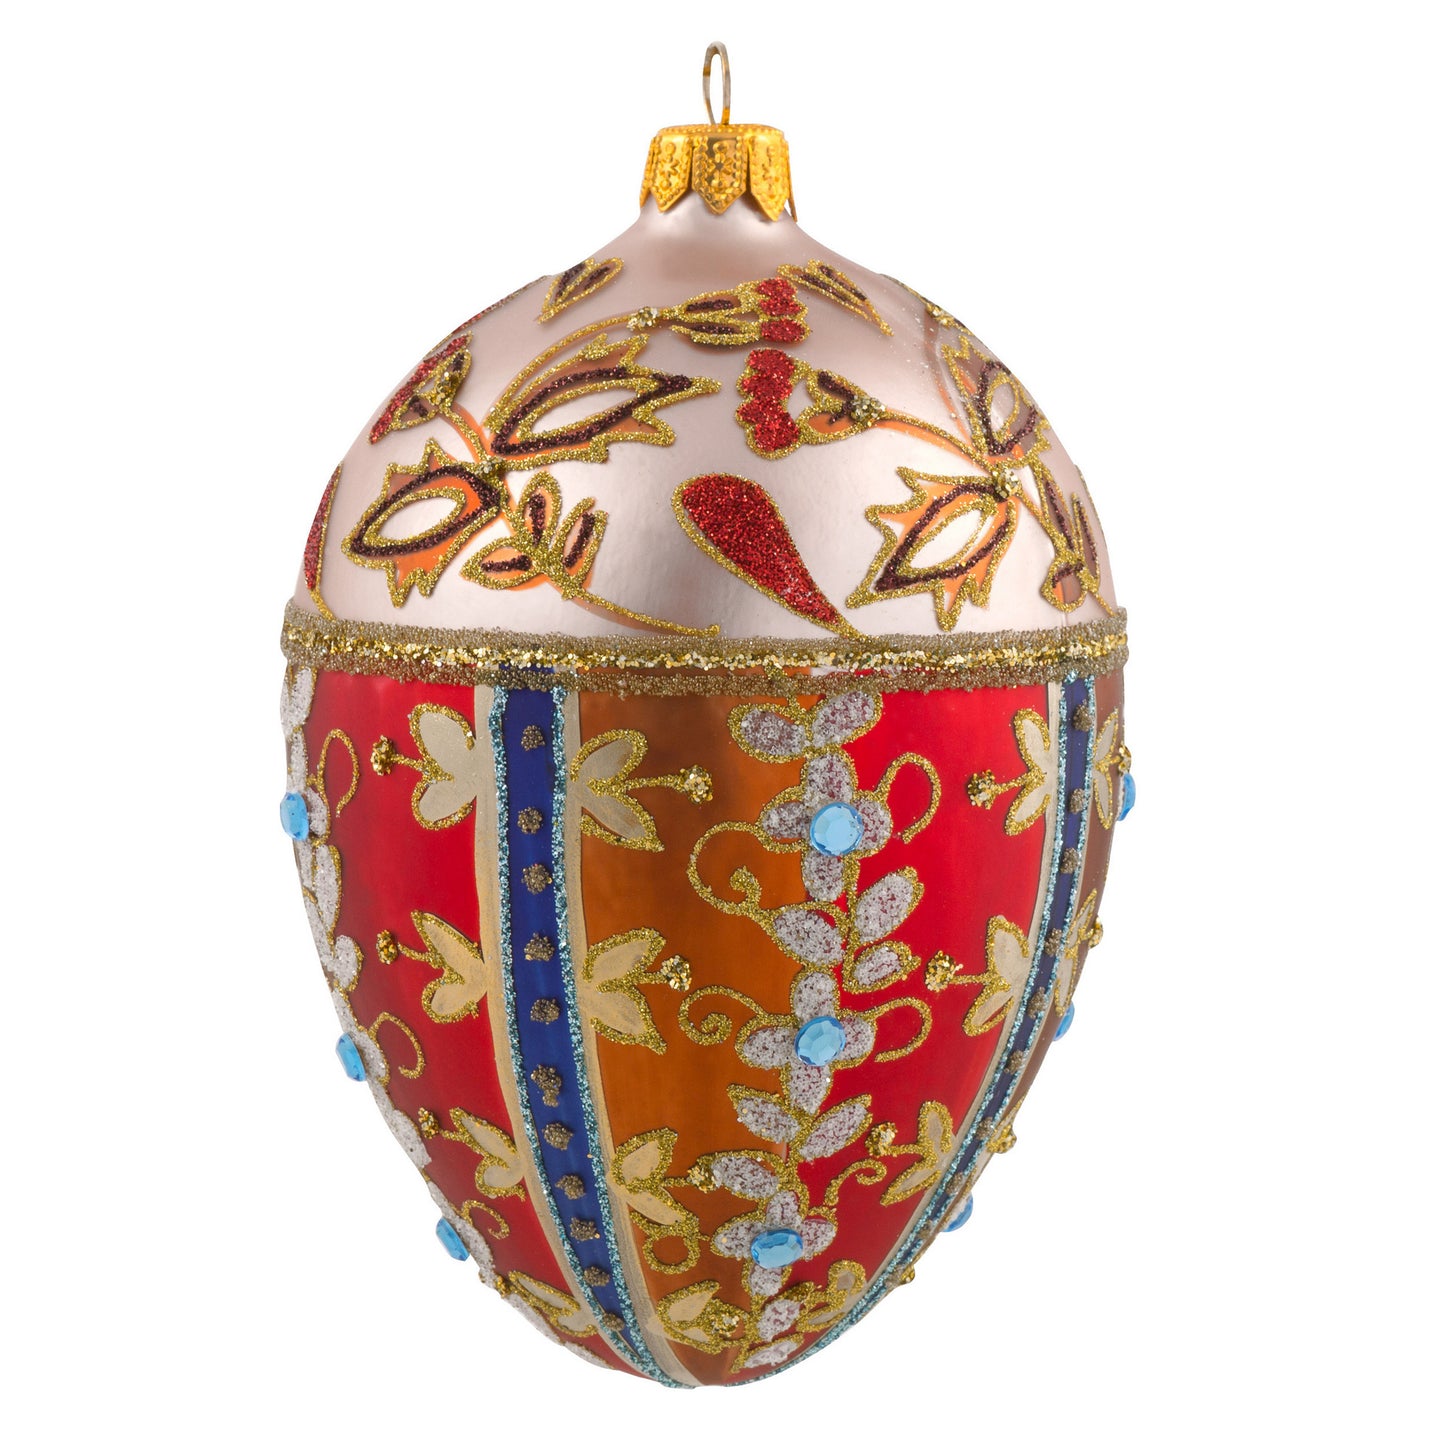 FABERGÉ EGG WITH ROYAL TAPESTRY PATTERN